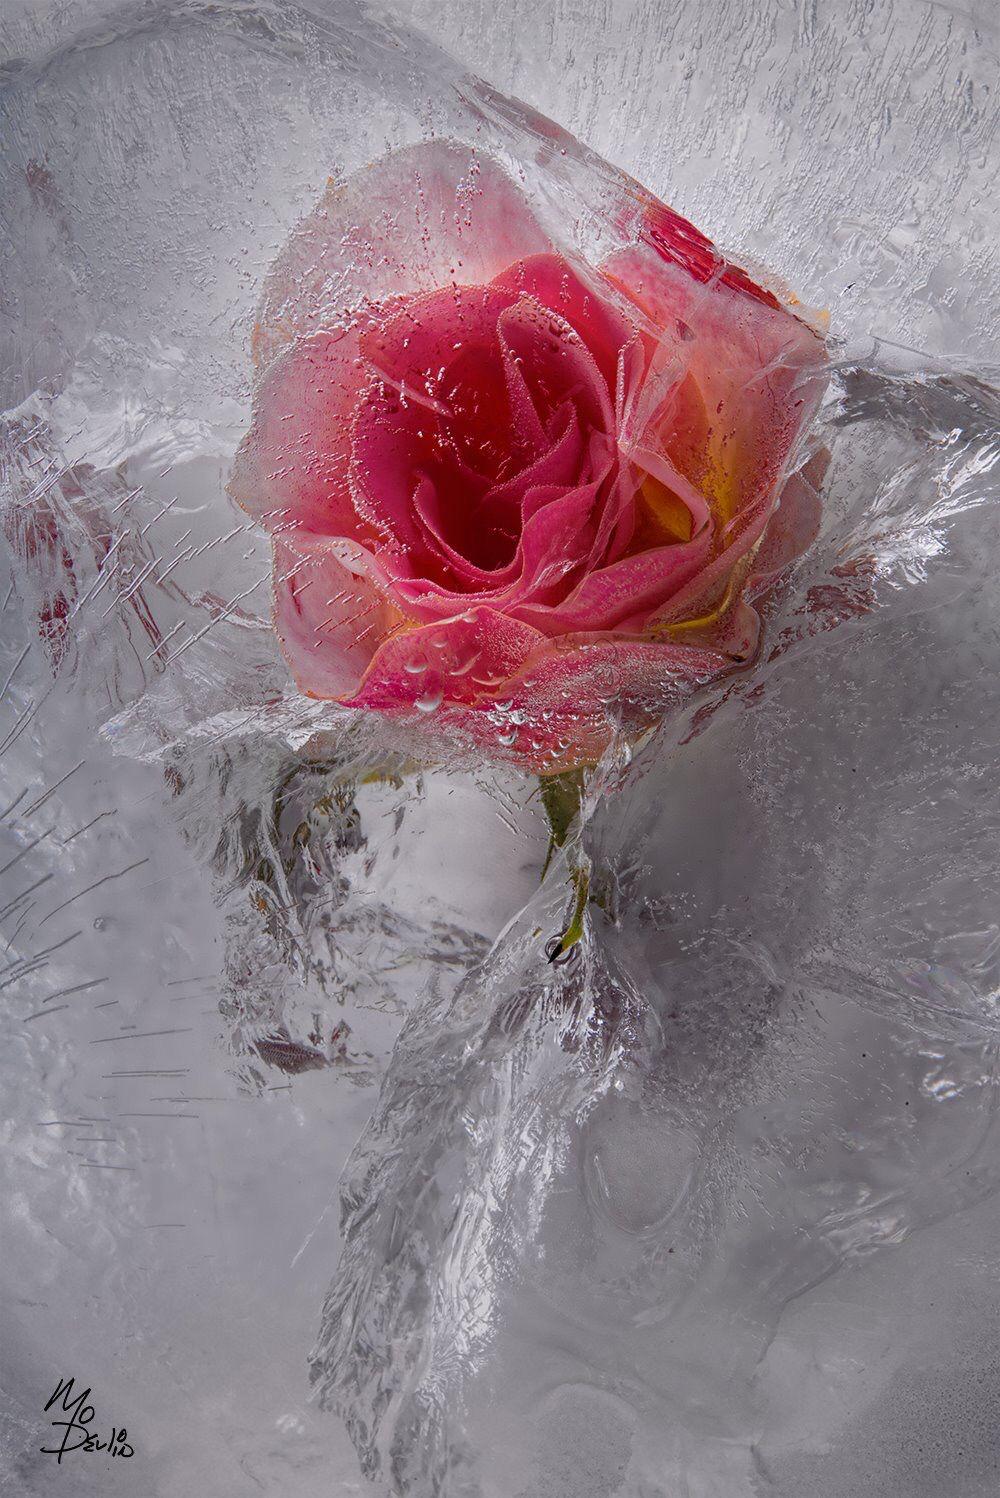 Frozen Flowers Ice Rose. Flowers photography, Flower ice